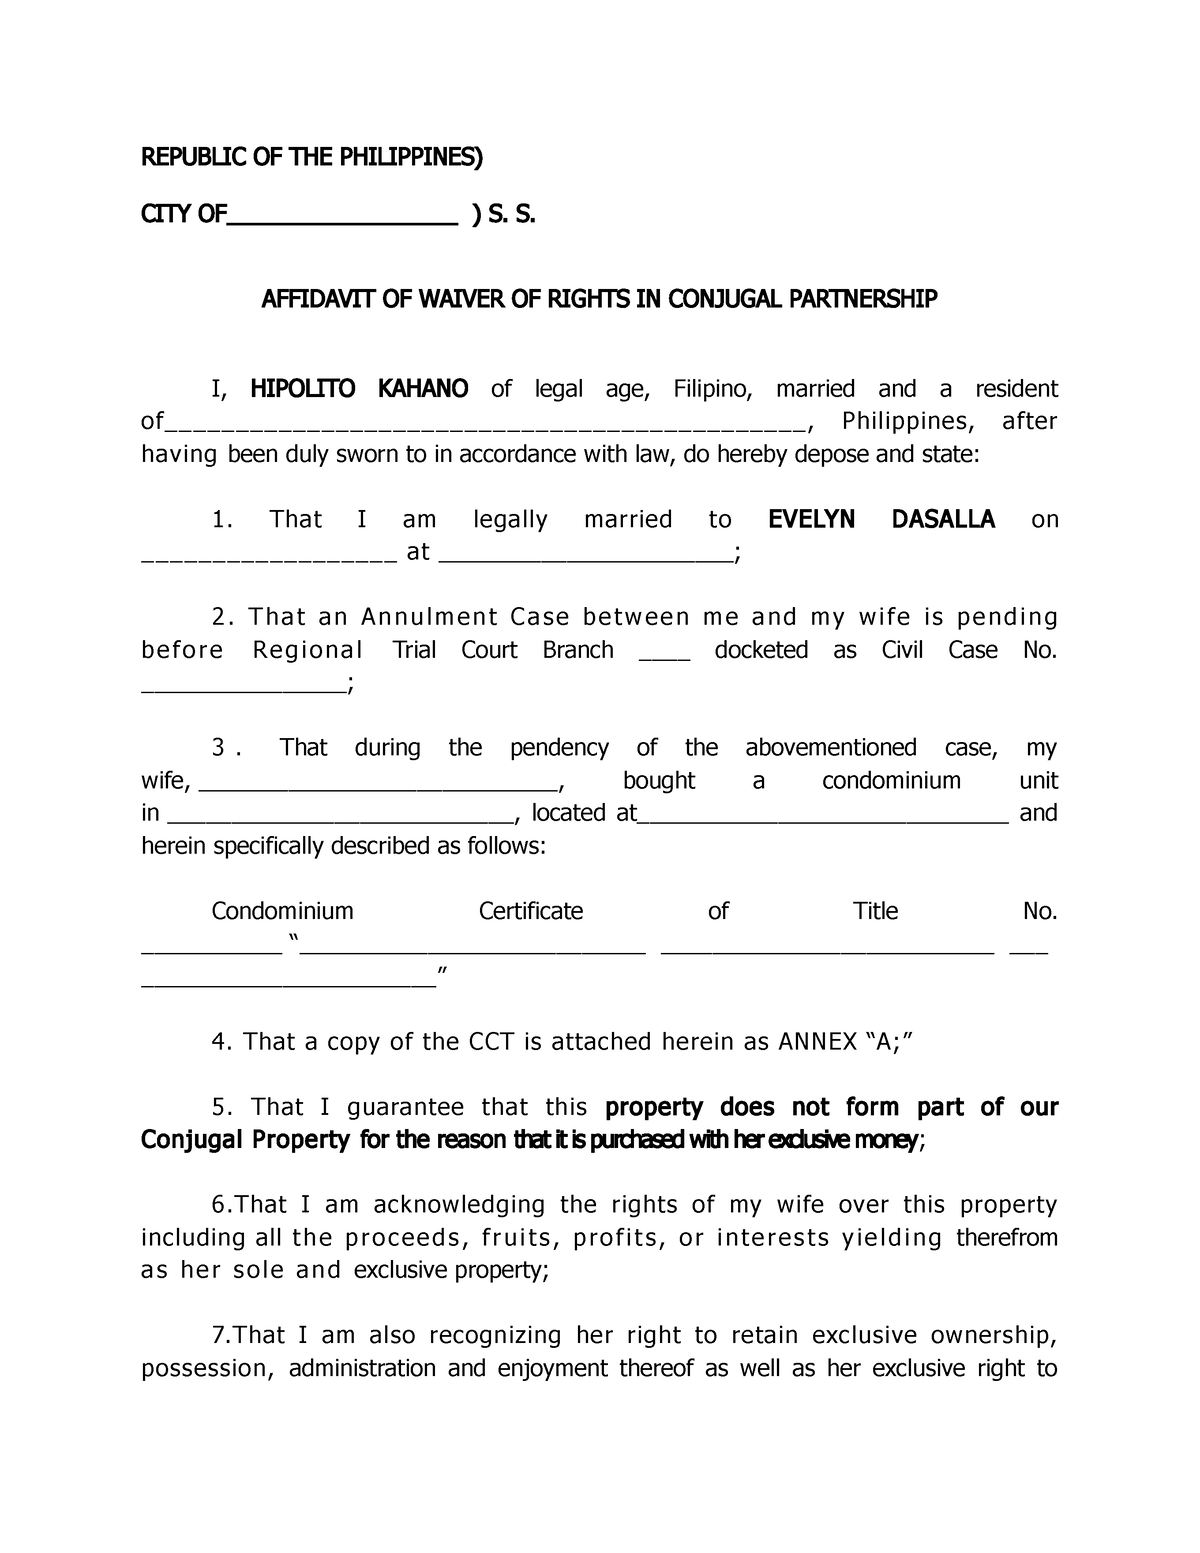 waiver-conjugal-properties-republic-of-the-philippines-city-of